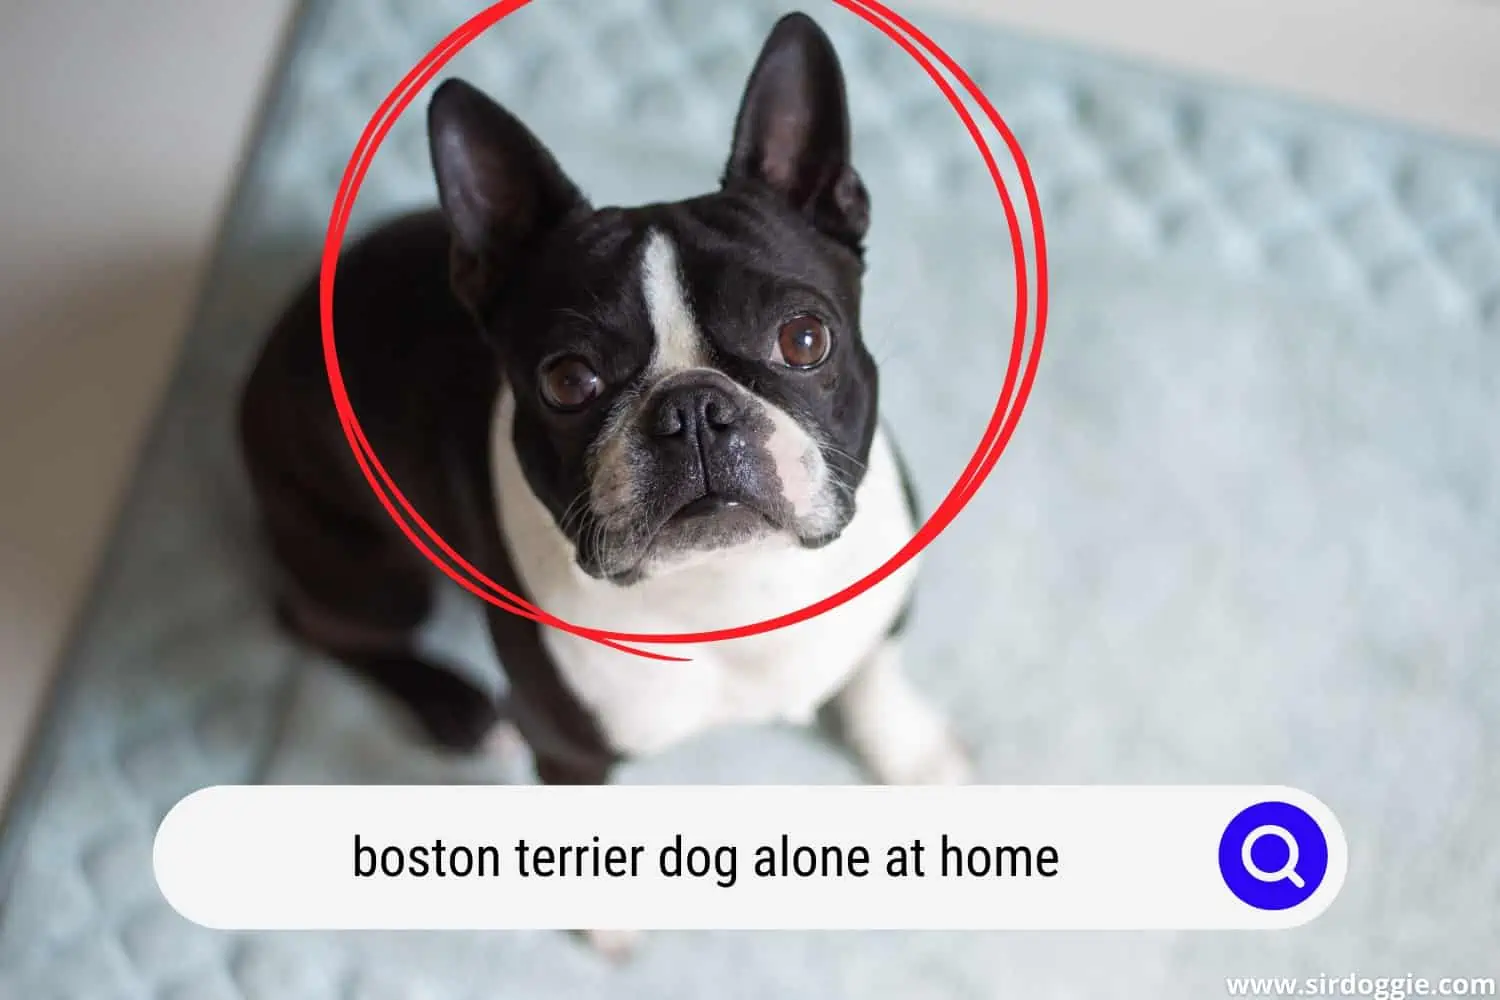 A Boston Terrier dog alone at home